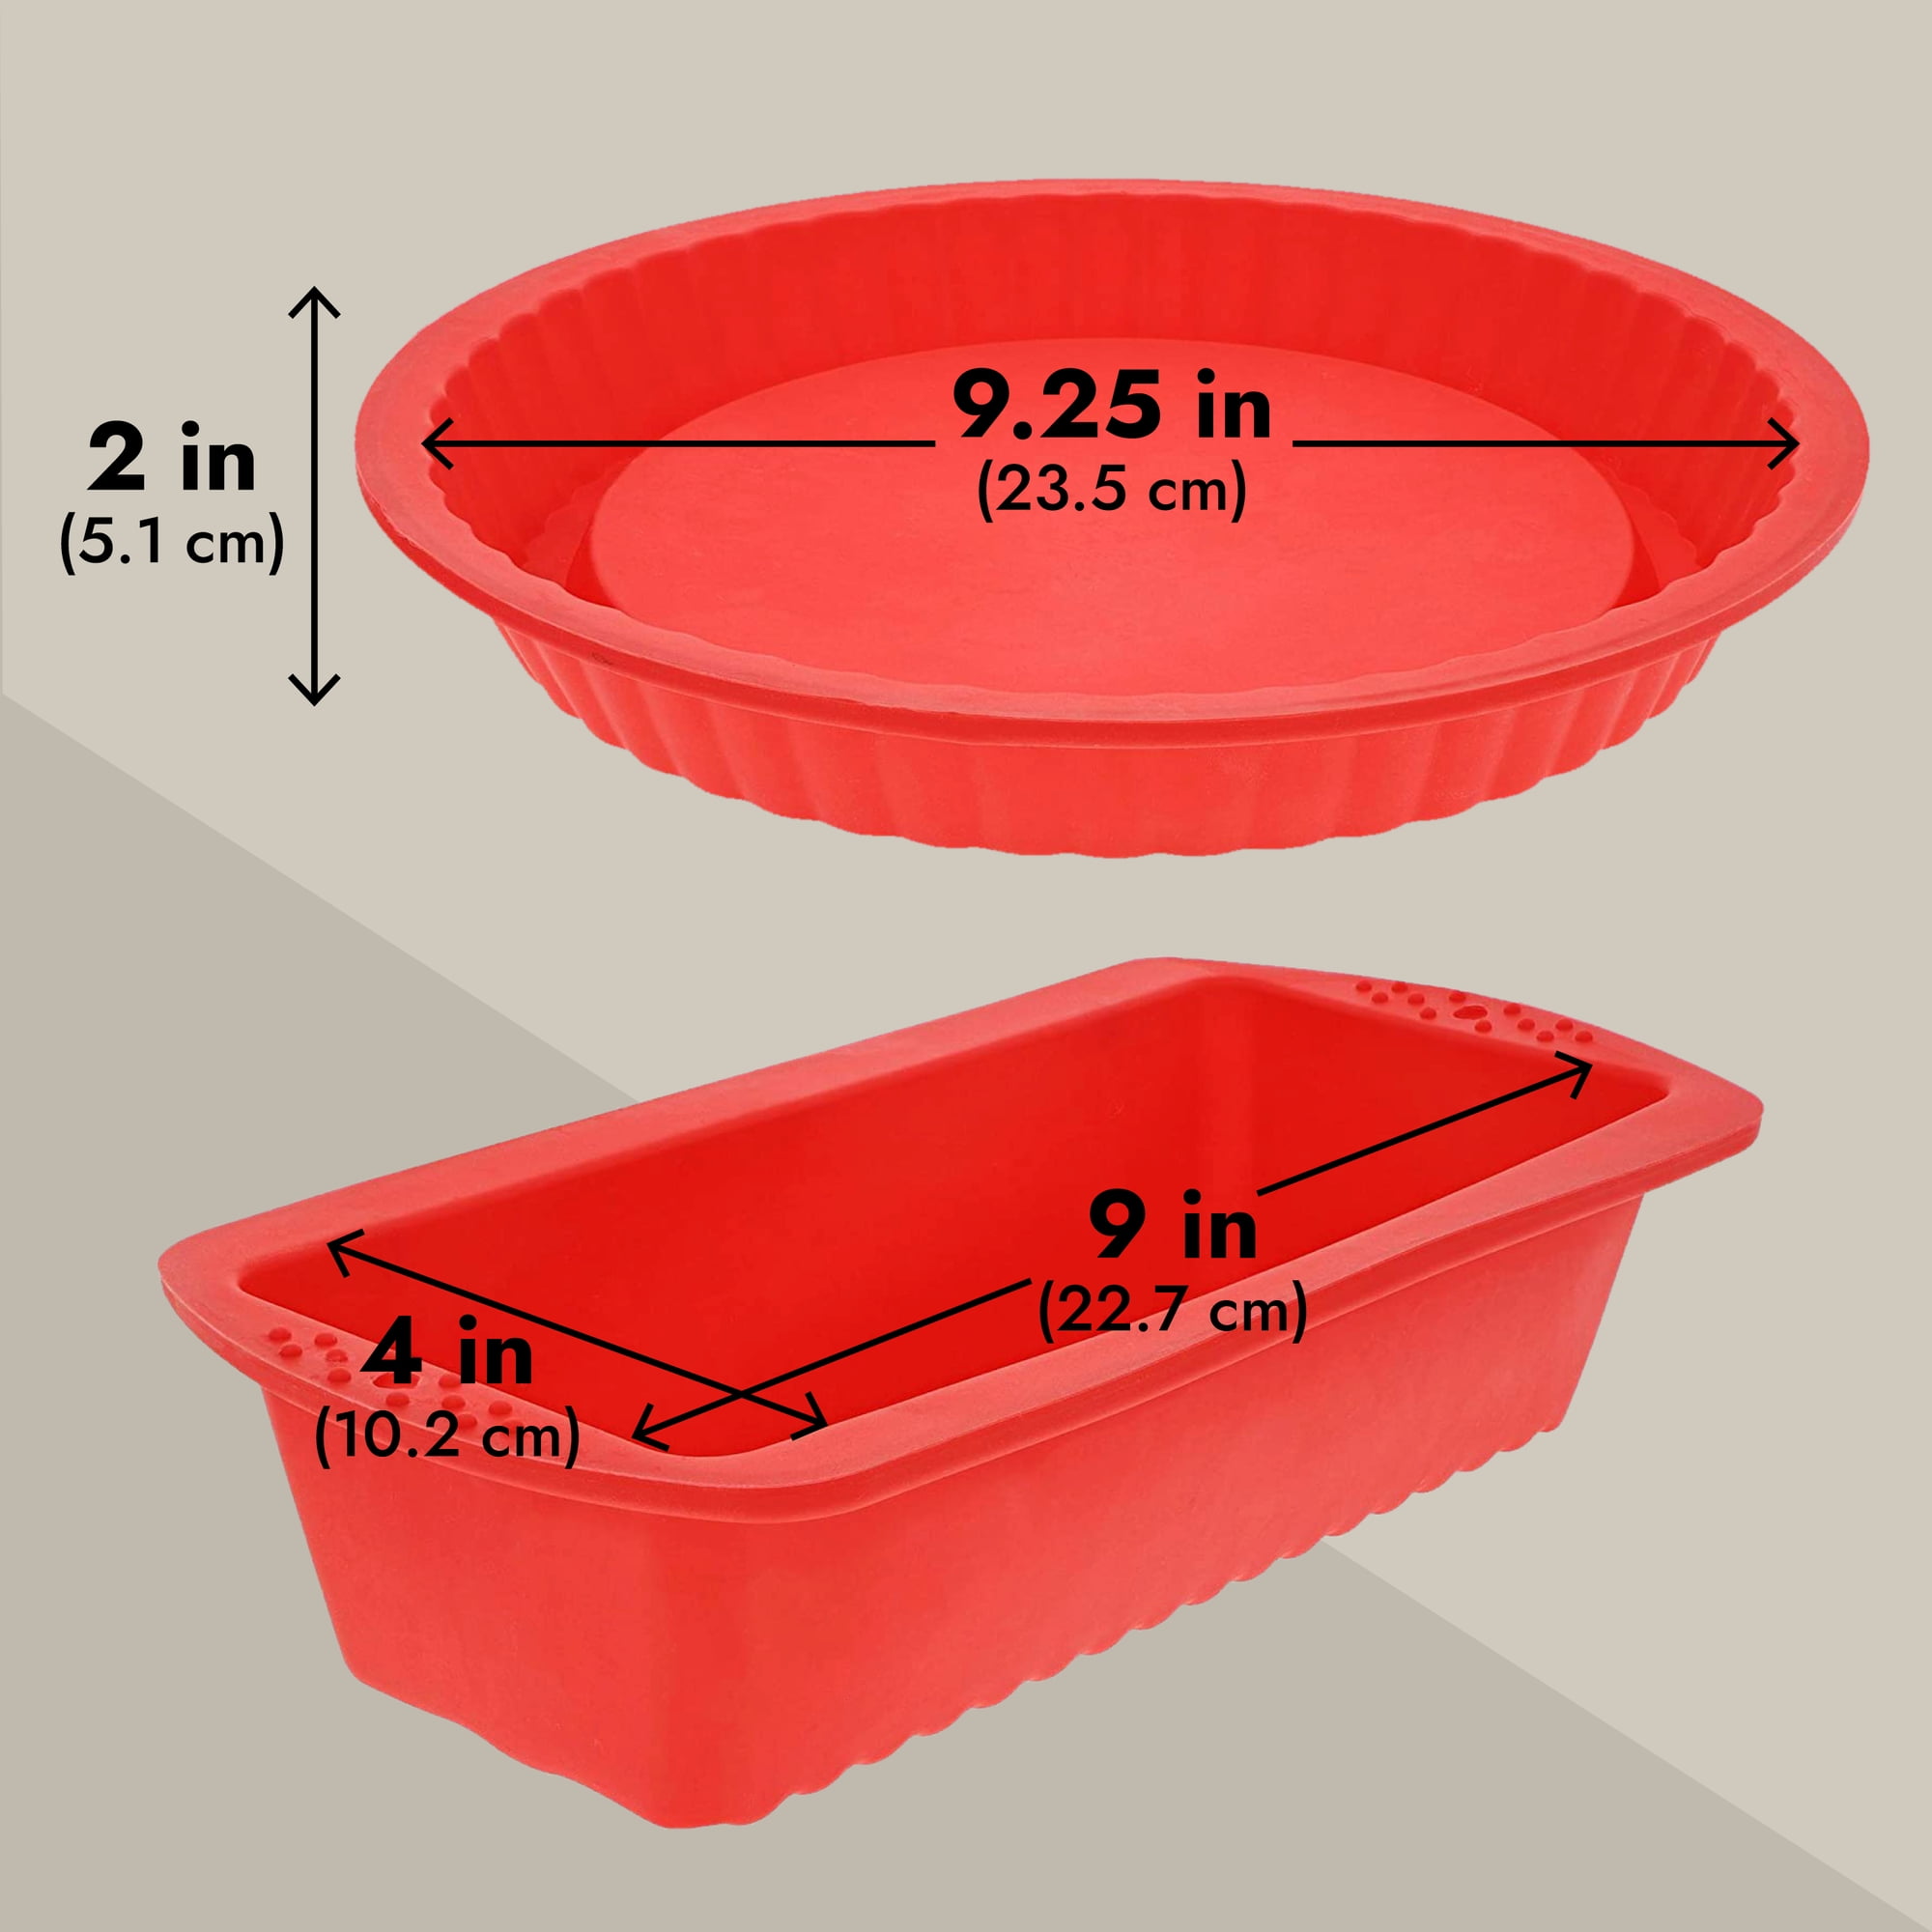 Trademark 11 in. x 1.5 in. Silicone Bakeware Set in Pink (18-Piece)  82-18700-PUR - The Home Depot